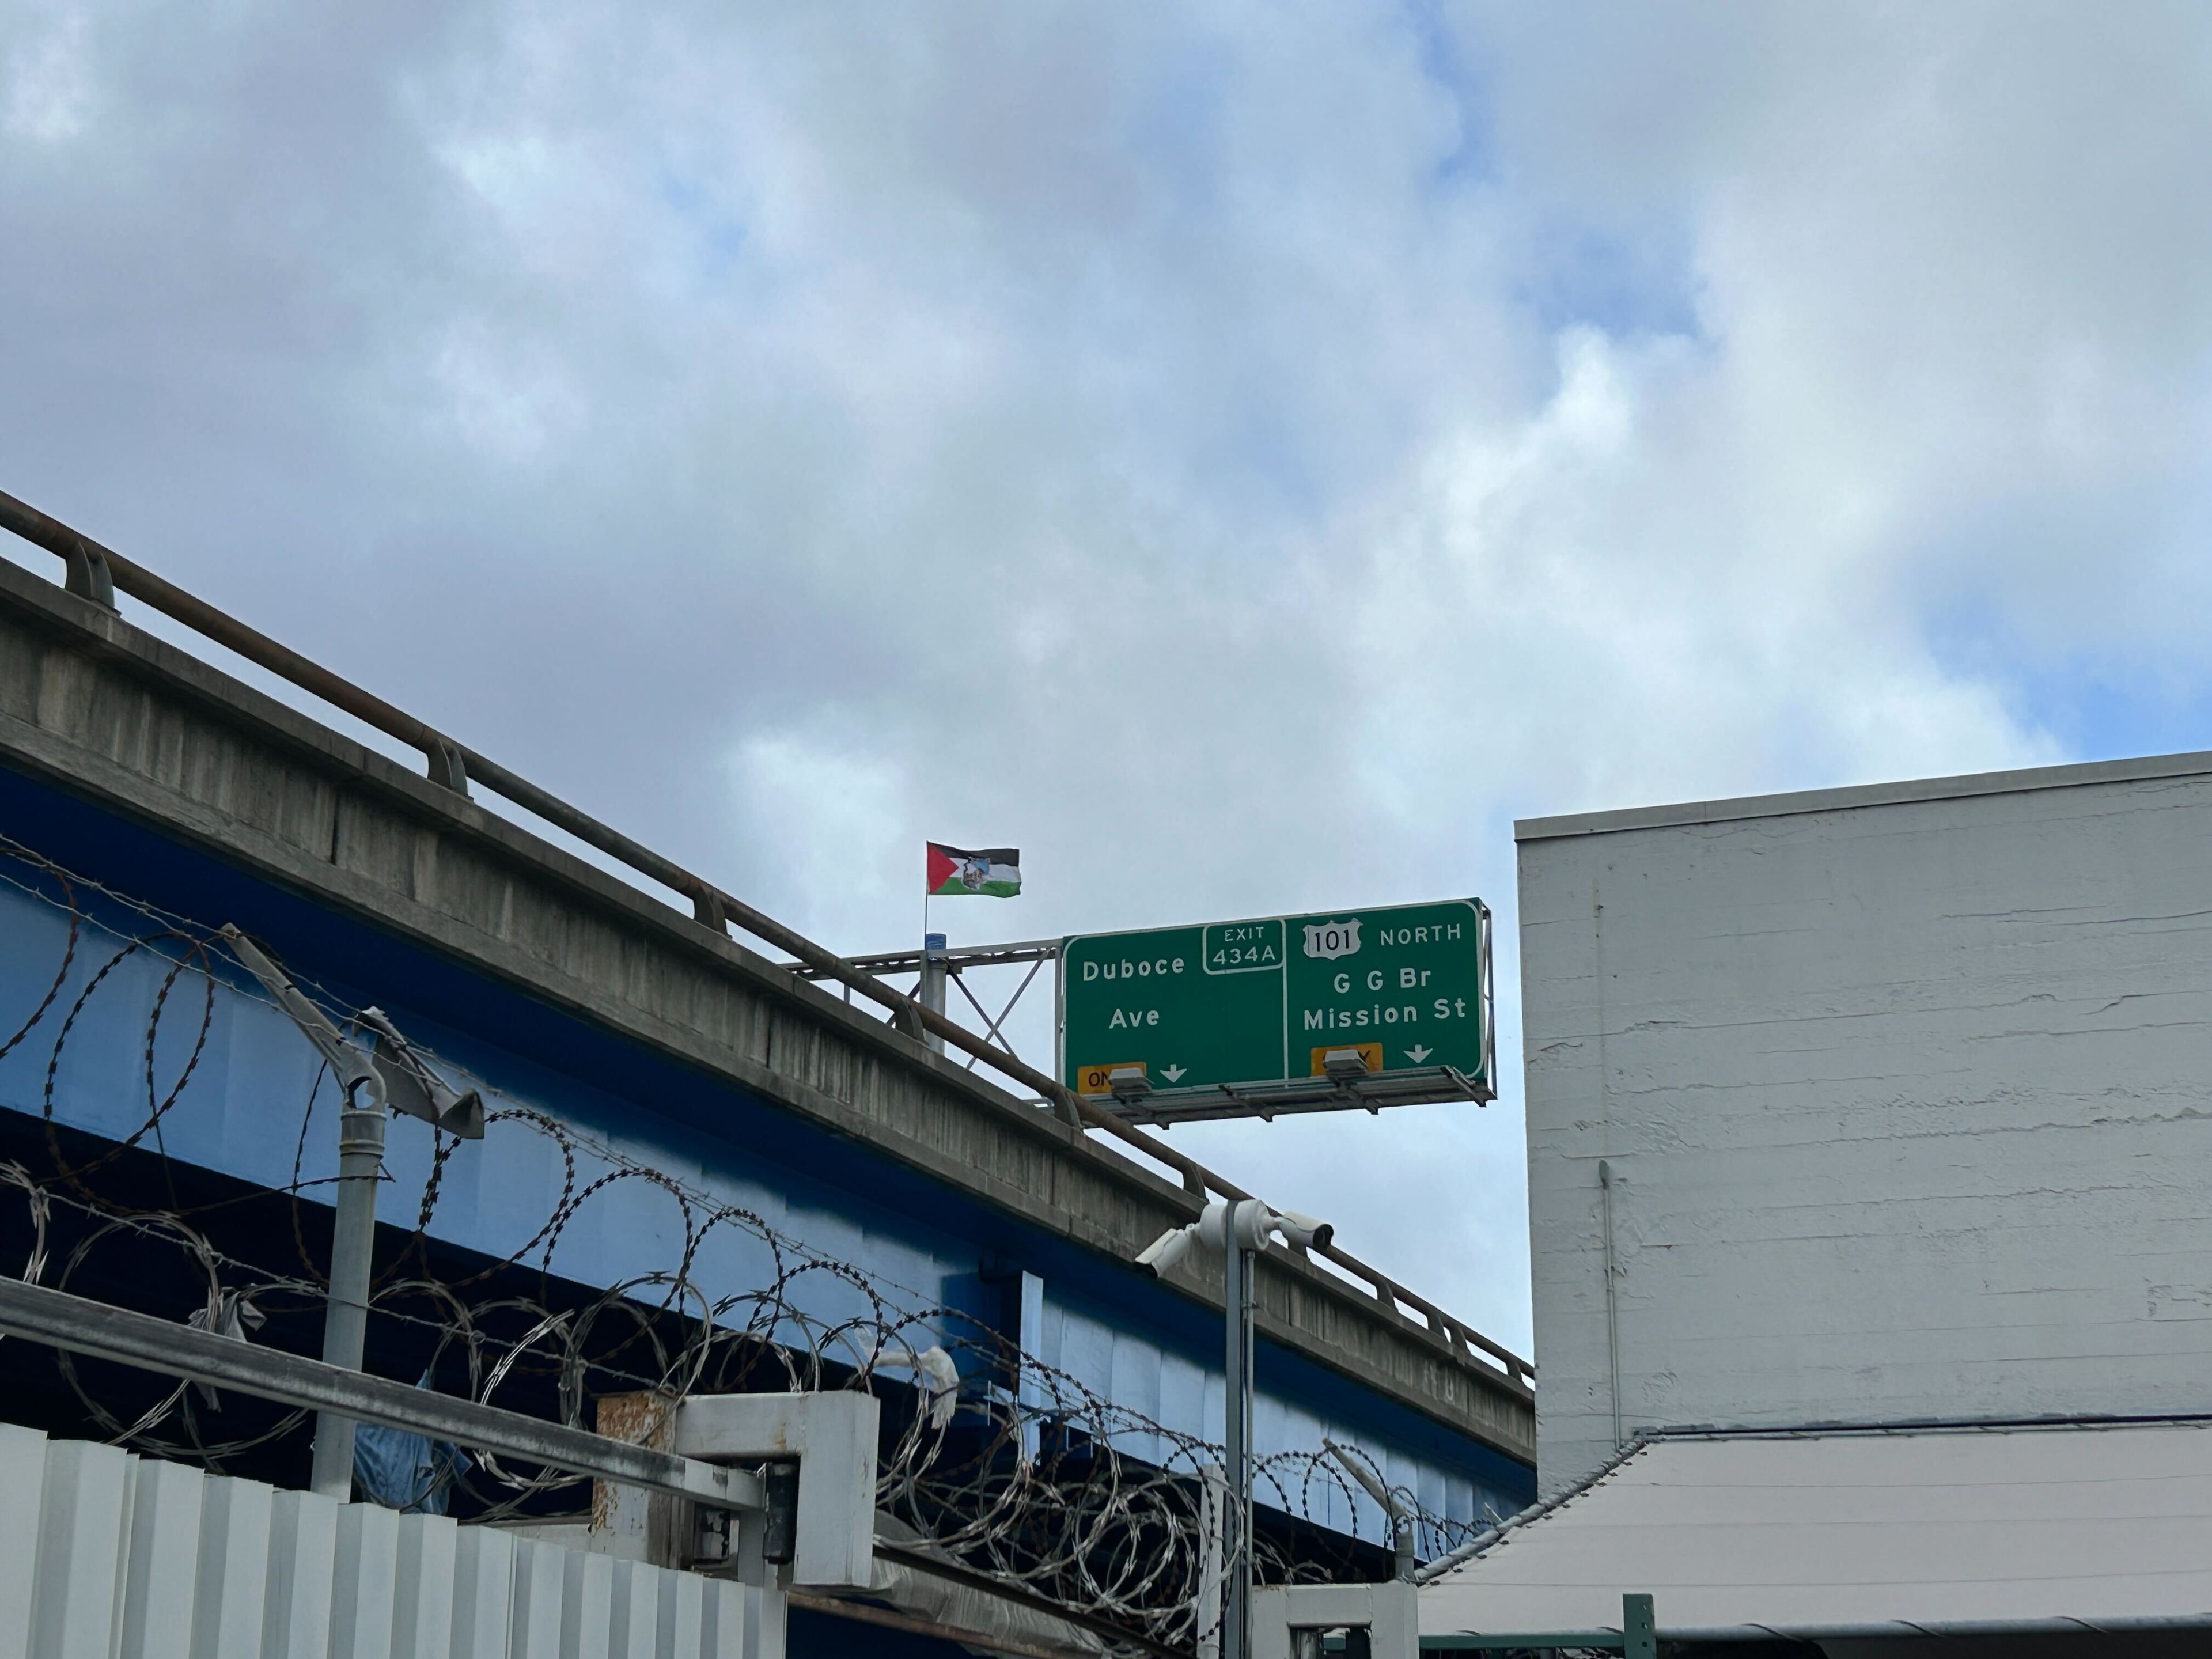 A flag stands above a railing on an elevated freeway under mostly cloudy skies